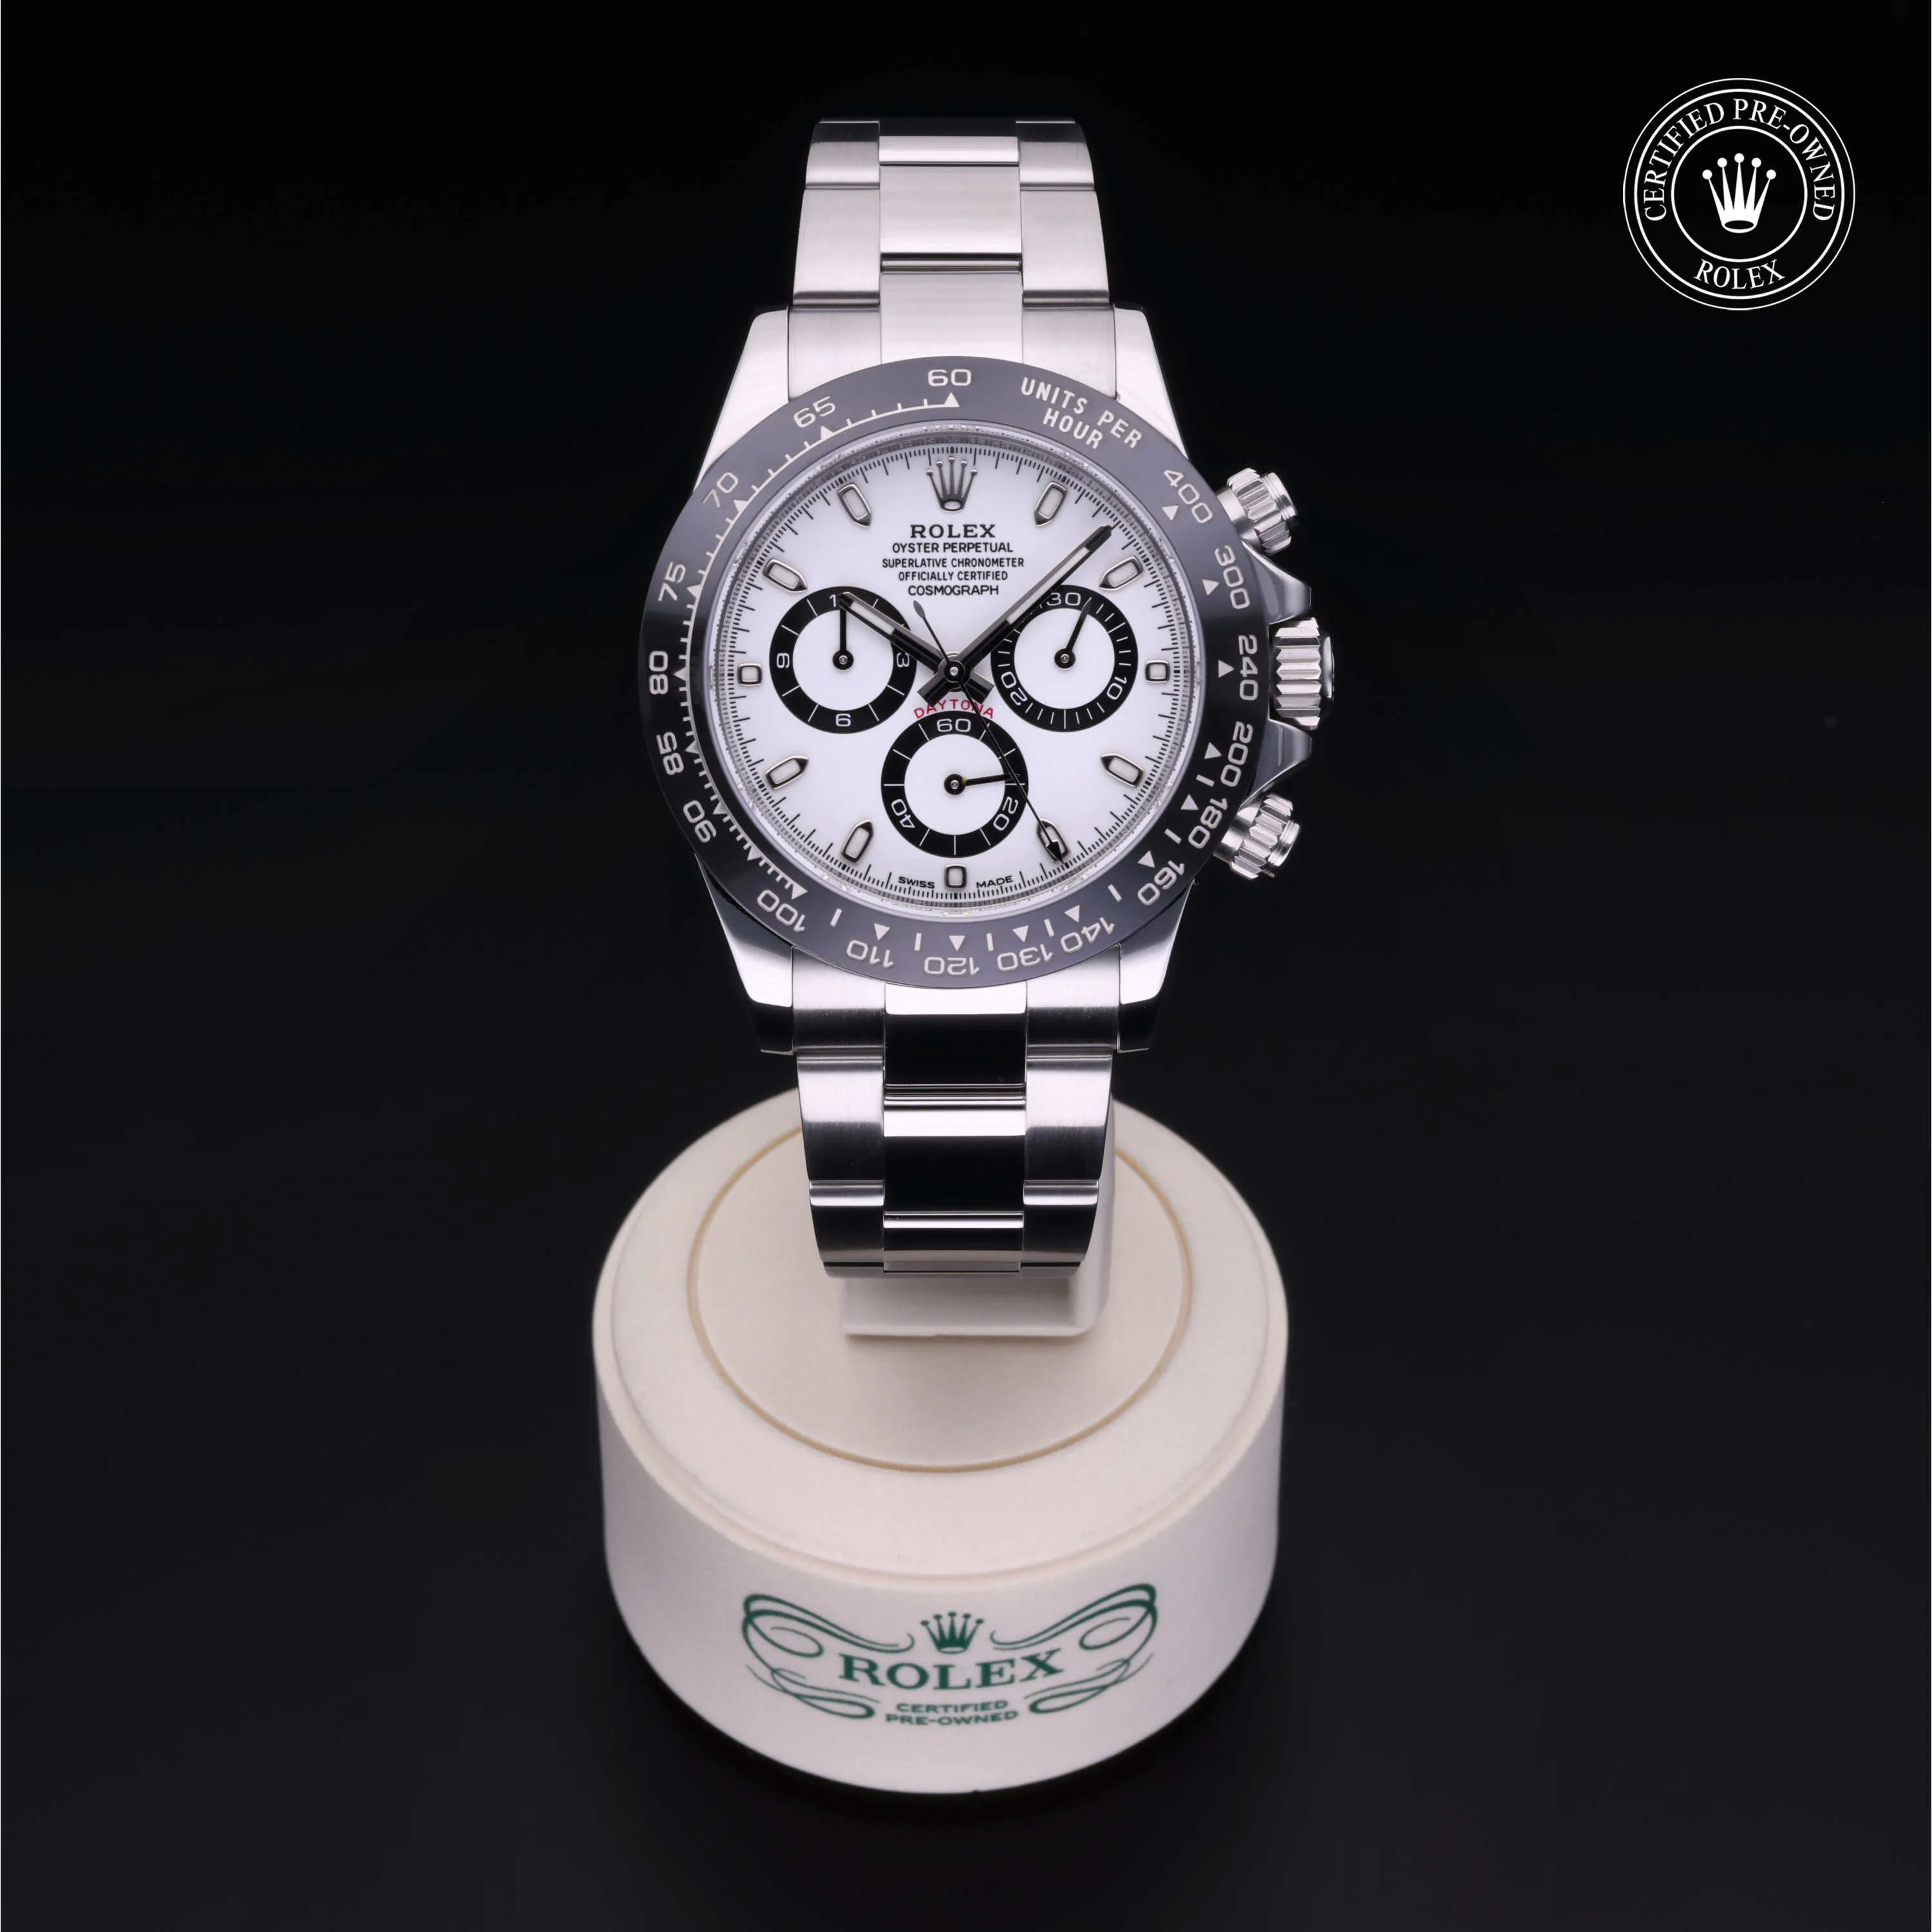 Rolex Oyster Perpetual "Cosmograph Daytona" M116500LN-0001 40mm Stainless steel White 1